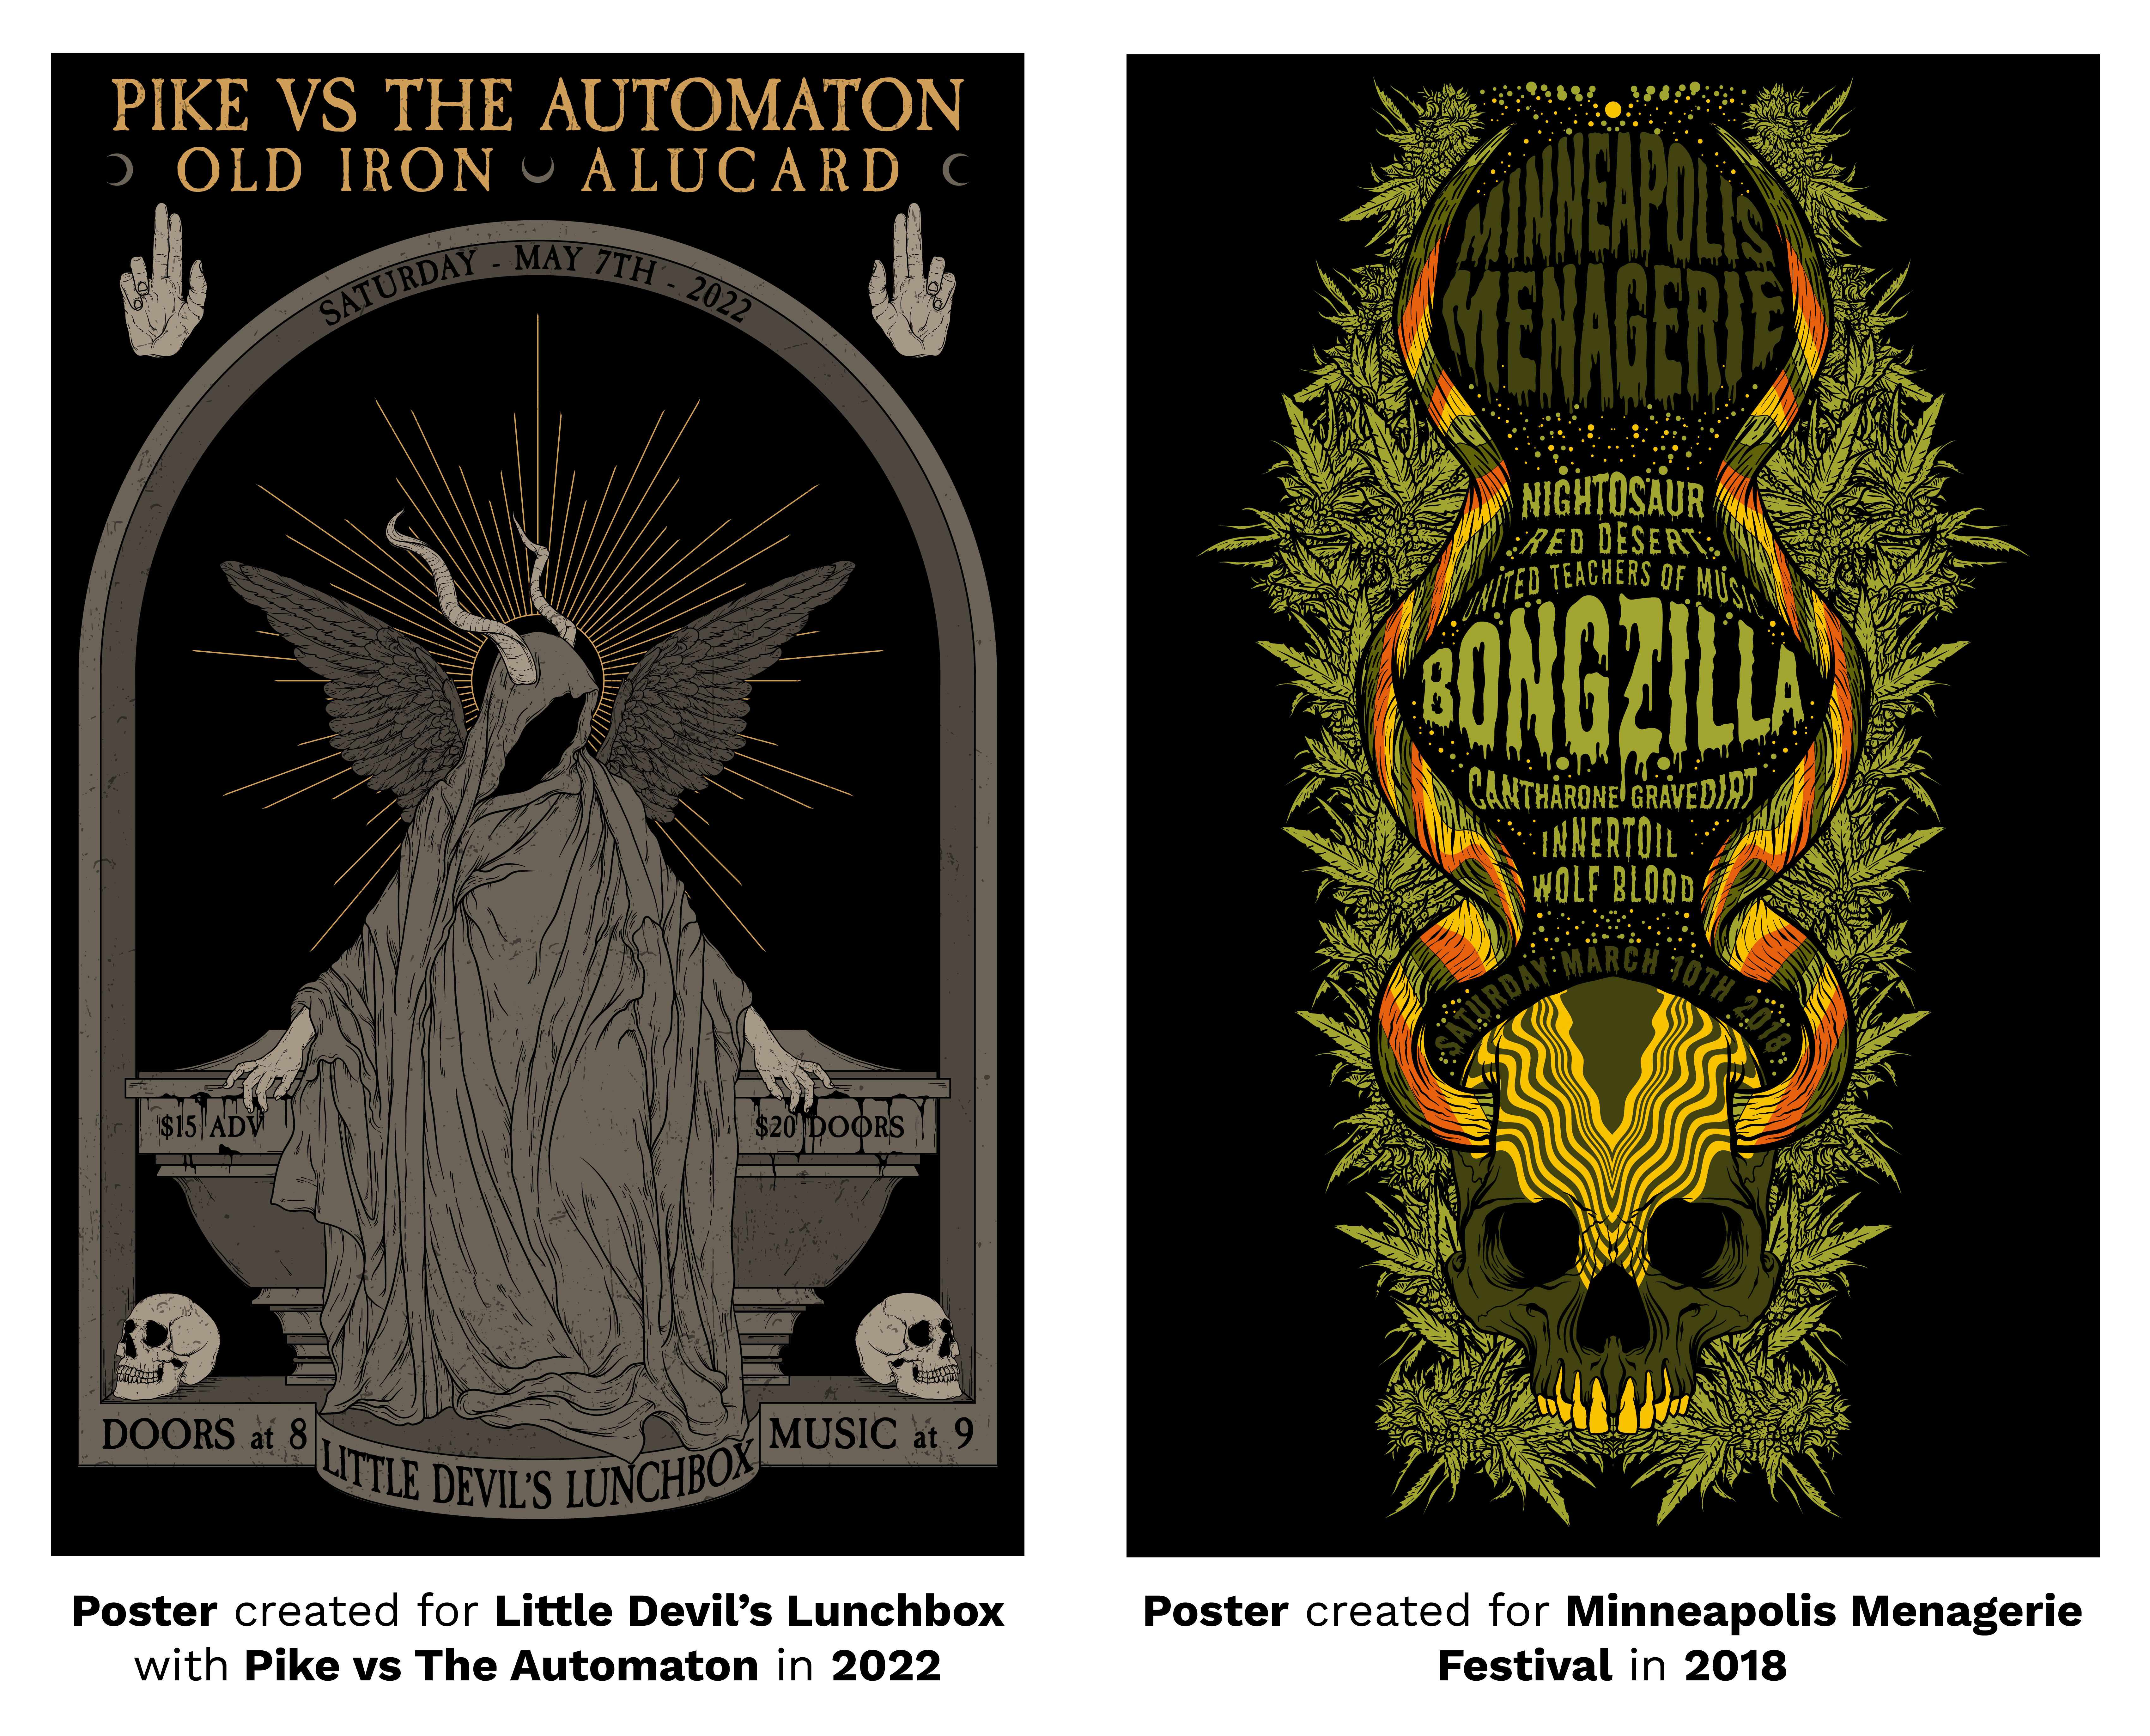 poster for little devils lunchbox with pike vs automaton and poster created for minneapolis menagerie festival